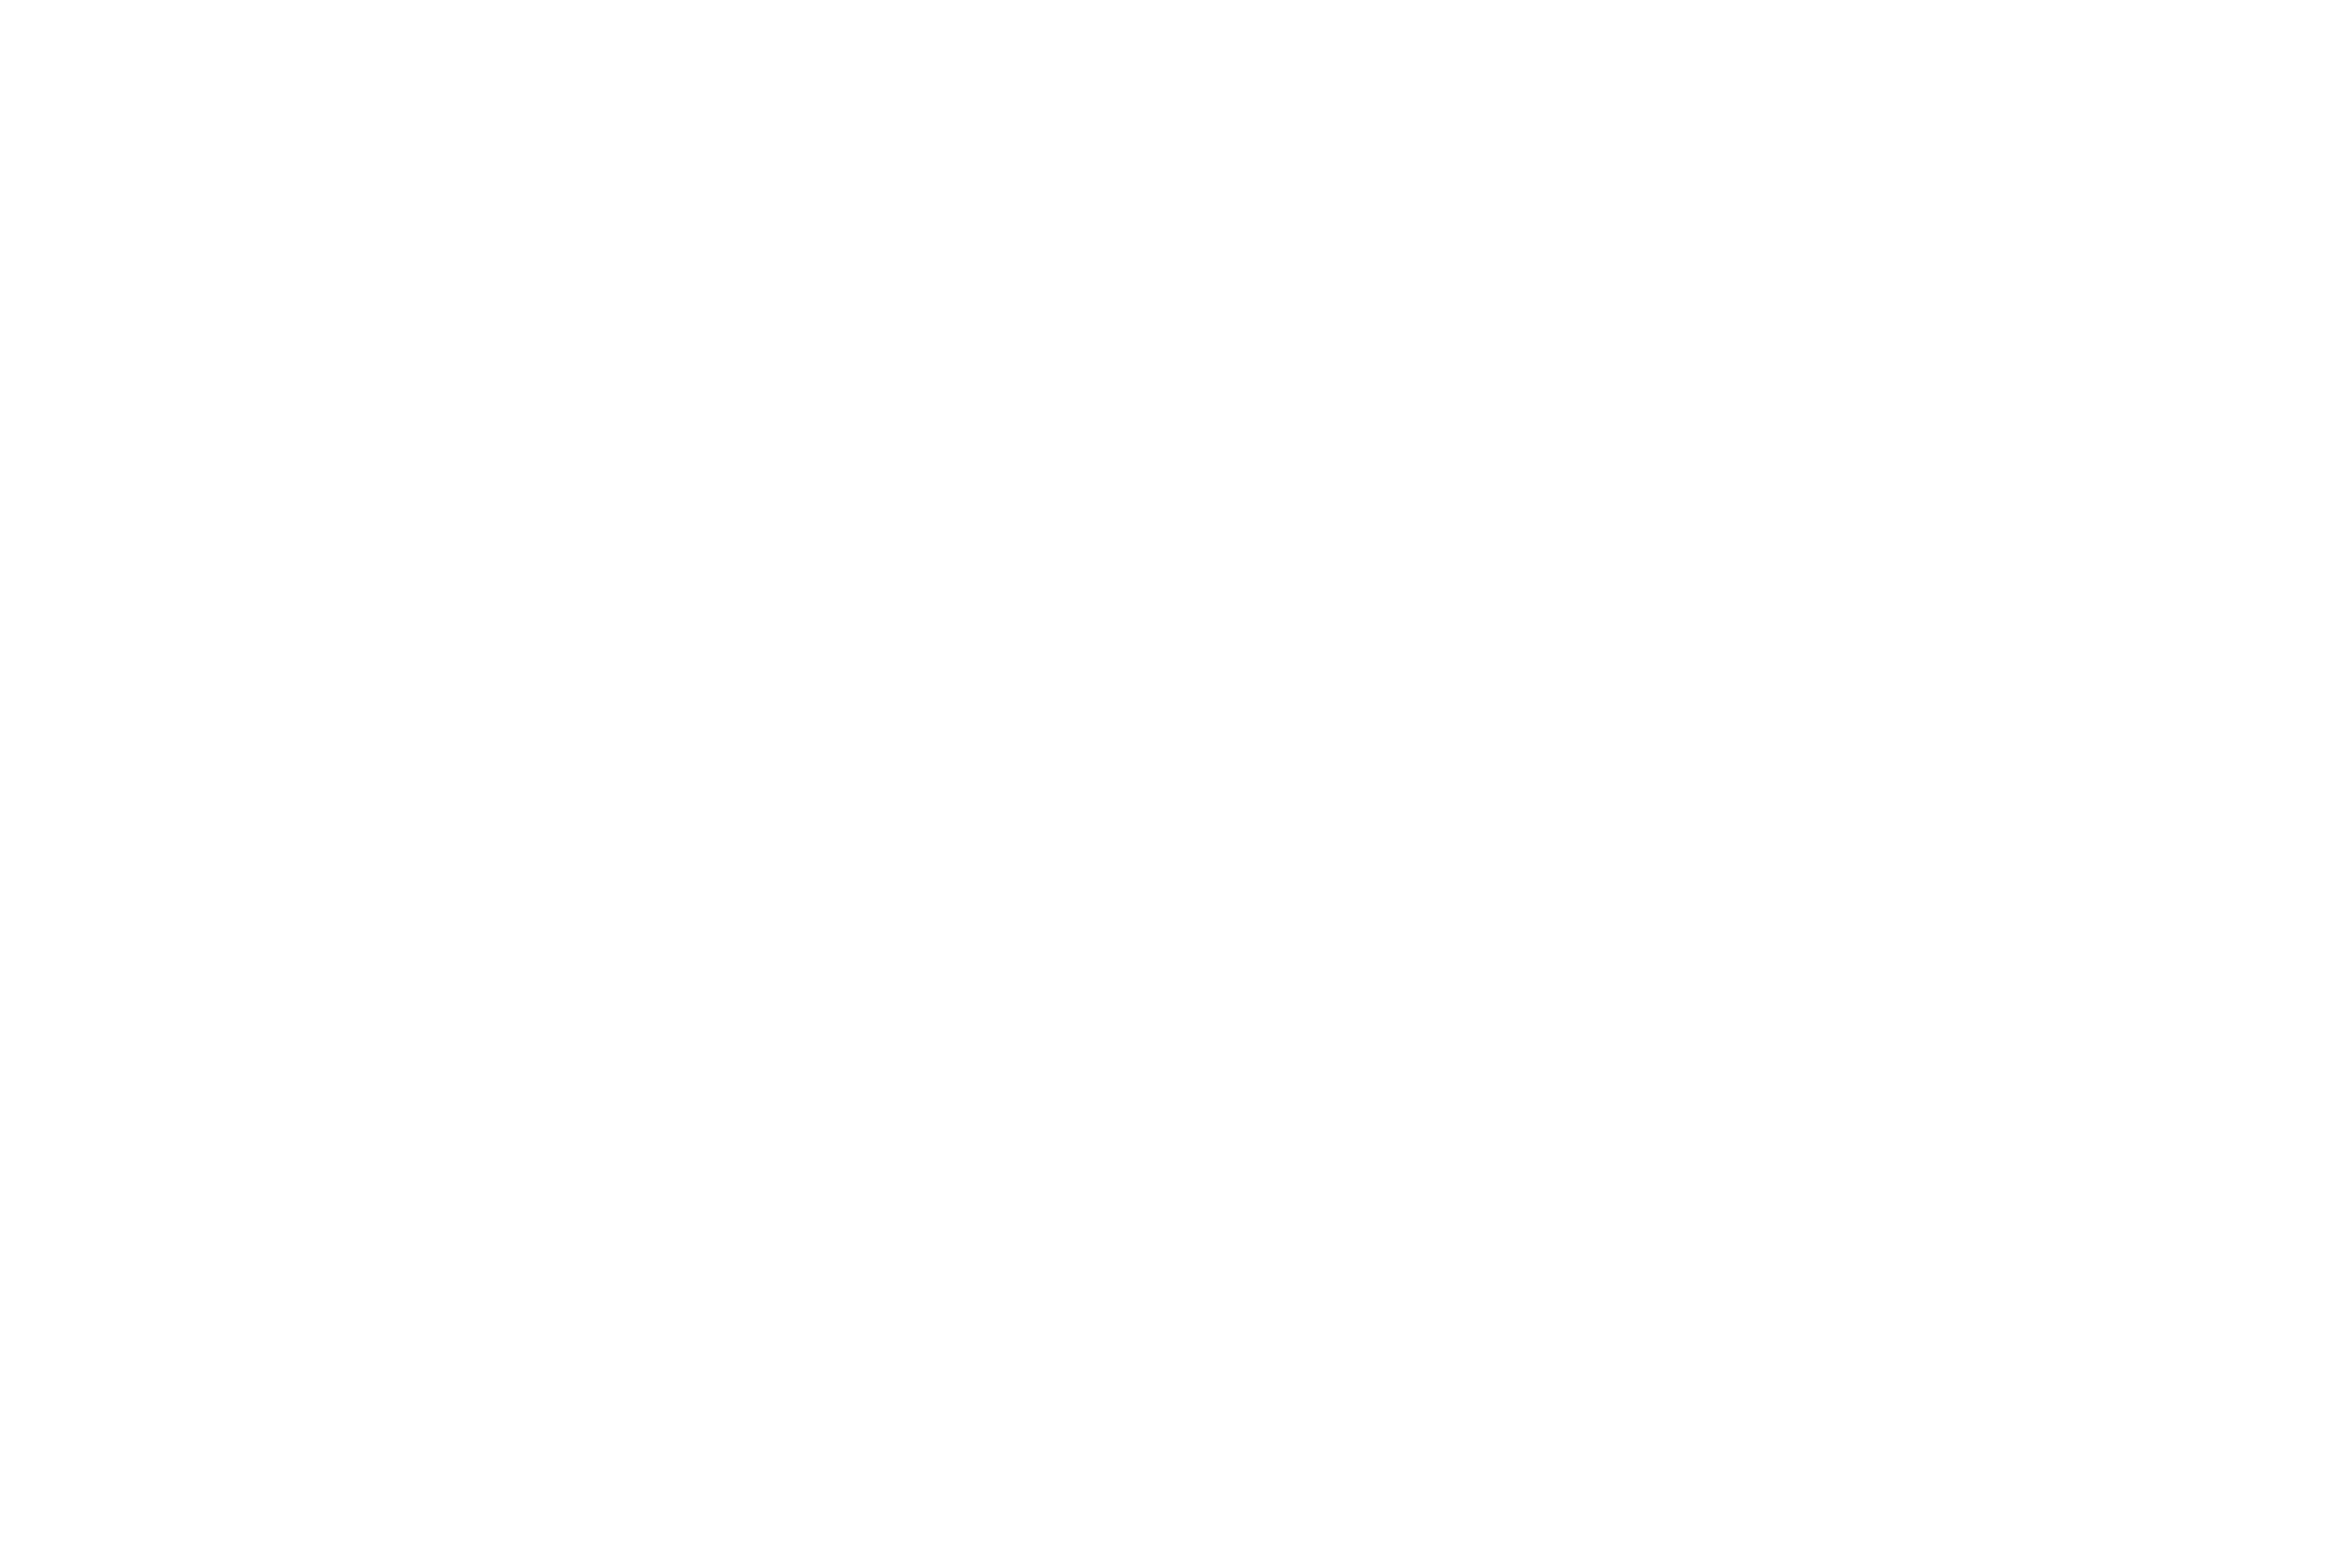 Description of the modular cutting machine: Combine your machine from a variety of series components: Adaptions also possible